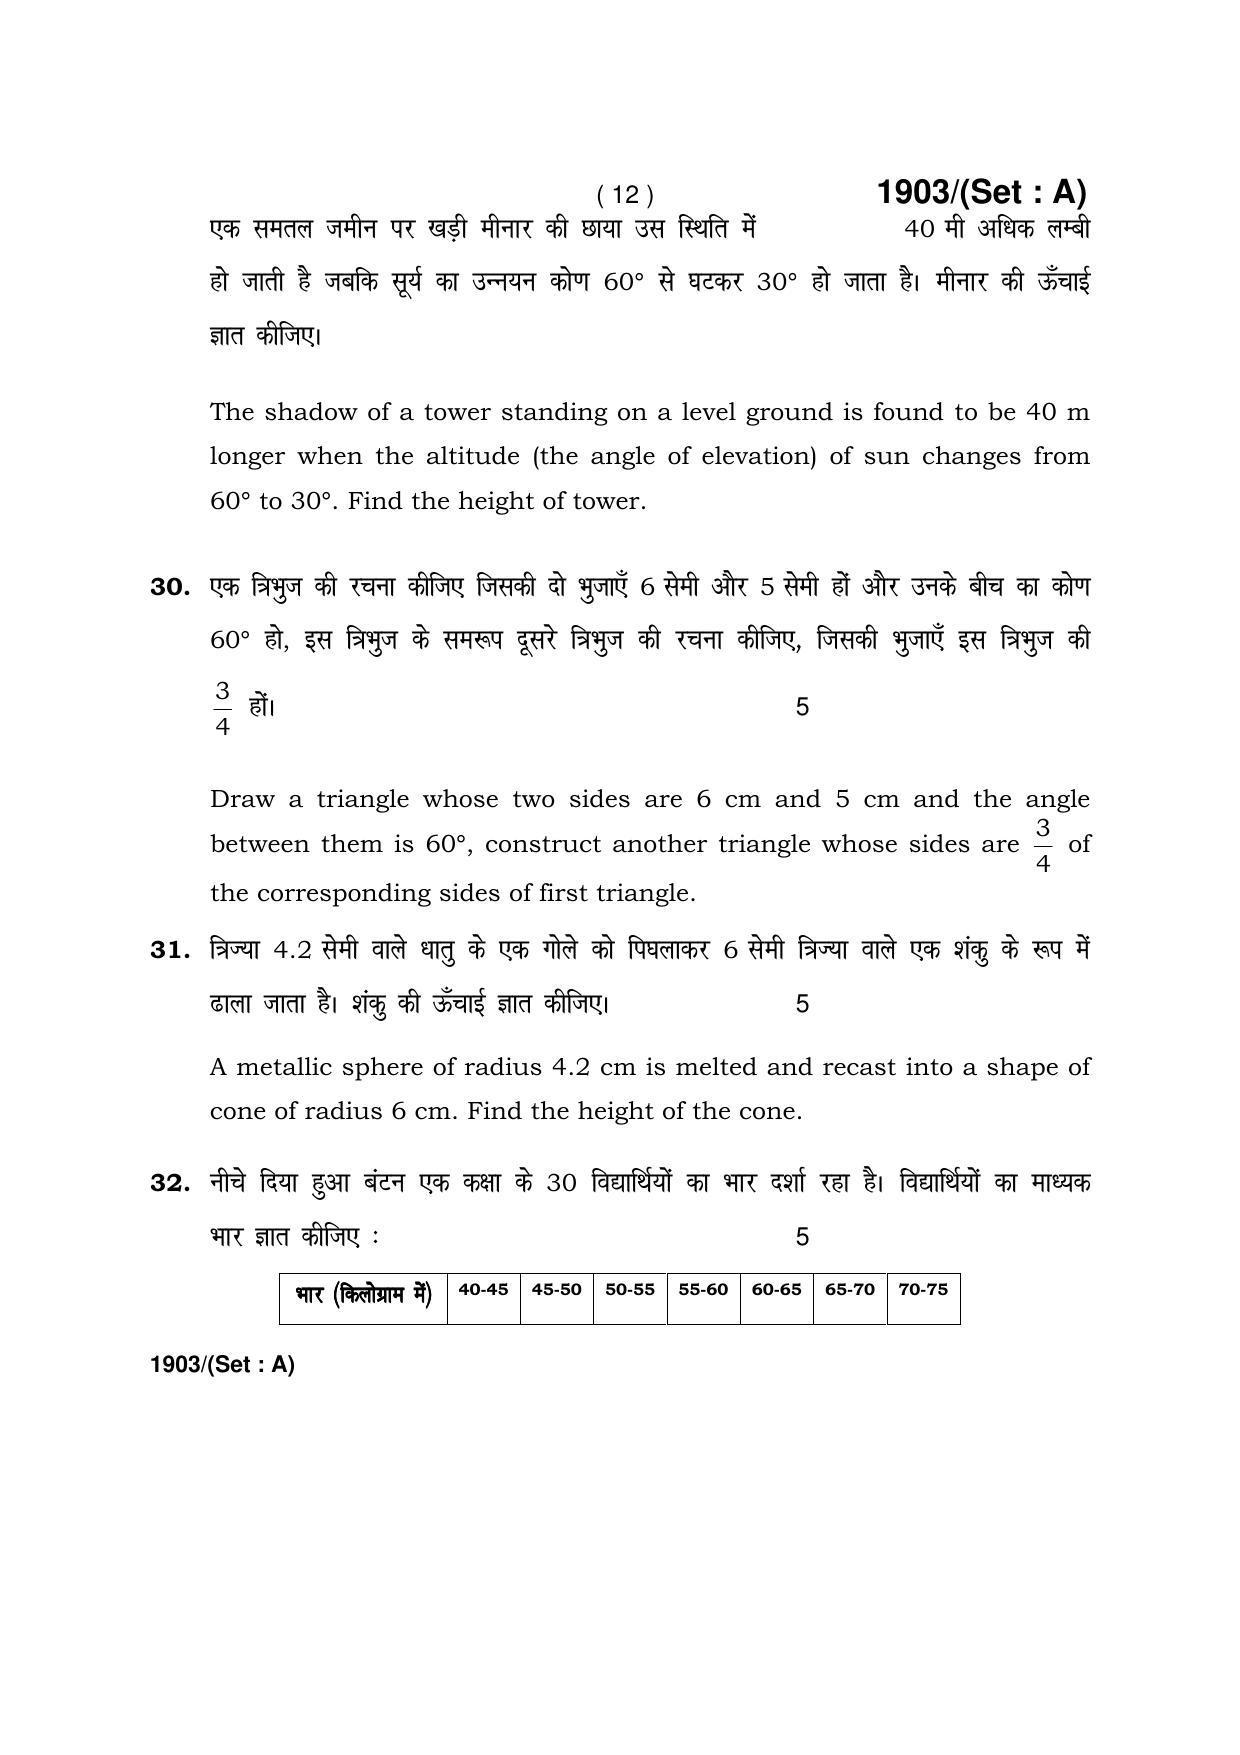 Haryana Board HBSE Class 10 Mathematics -A 2017 Question Paper - Page 12